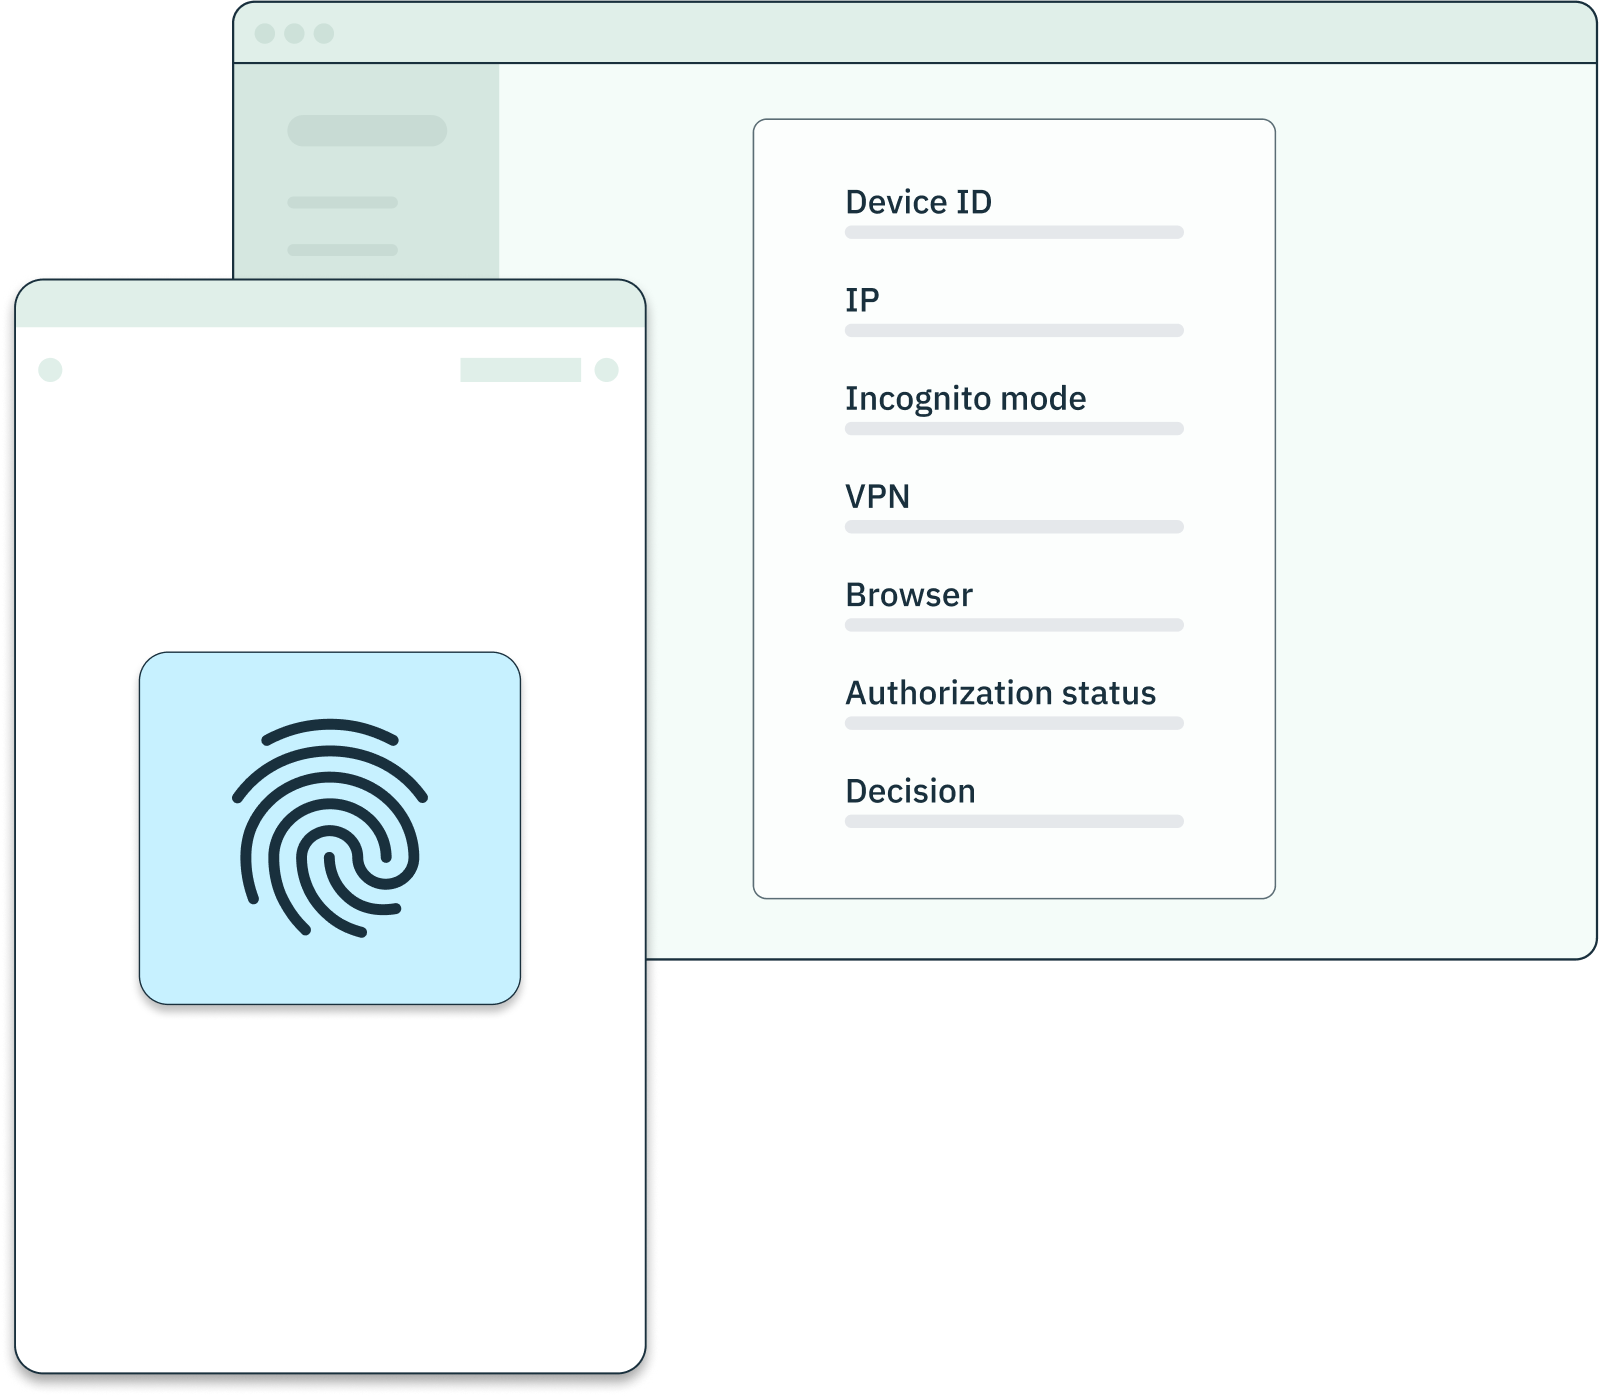 A screenshot of a device fingerprint, with its relevant fields